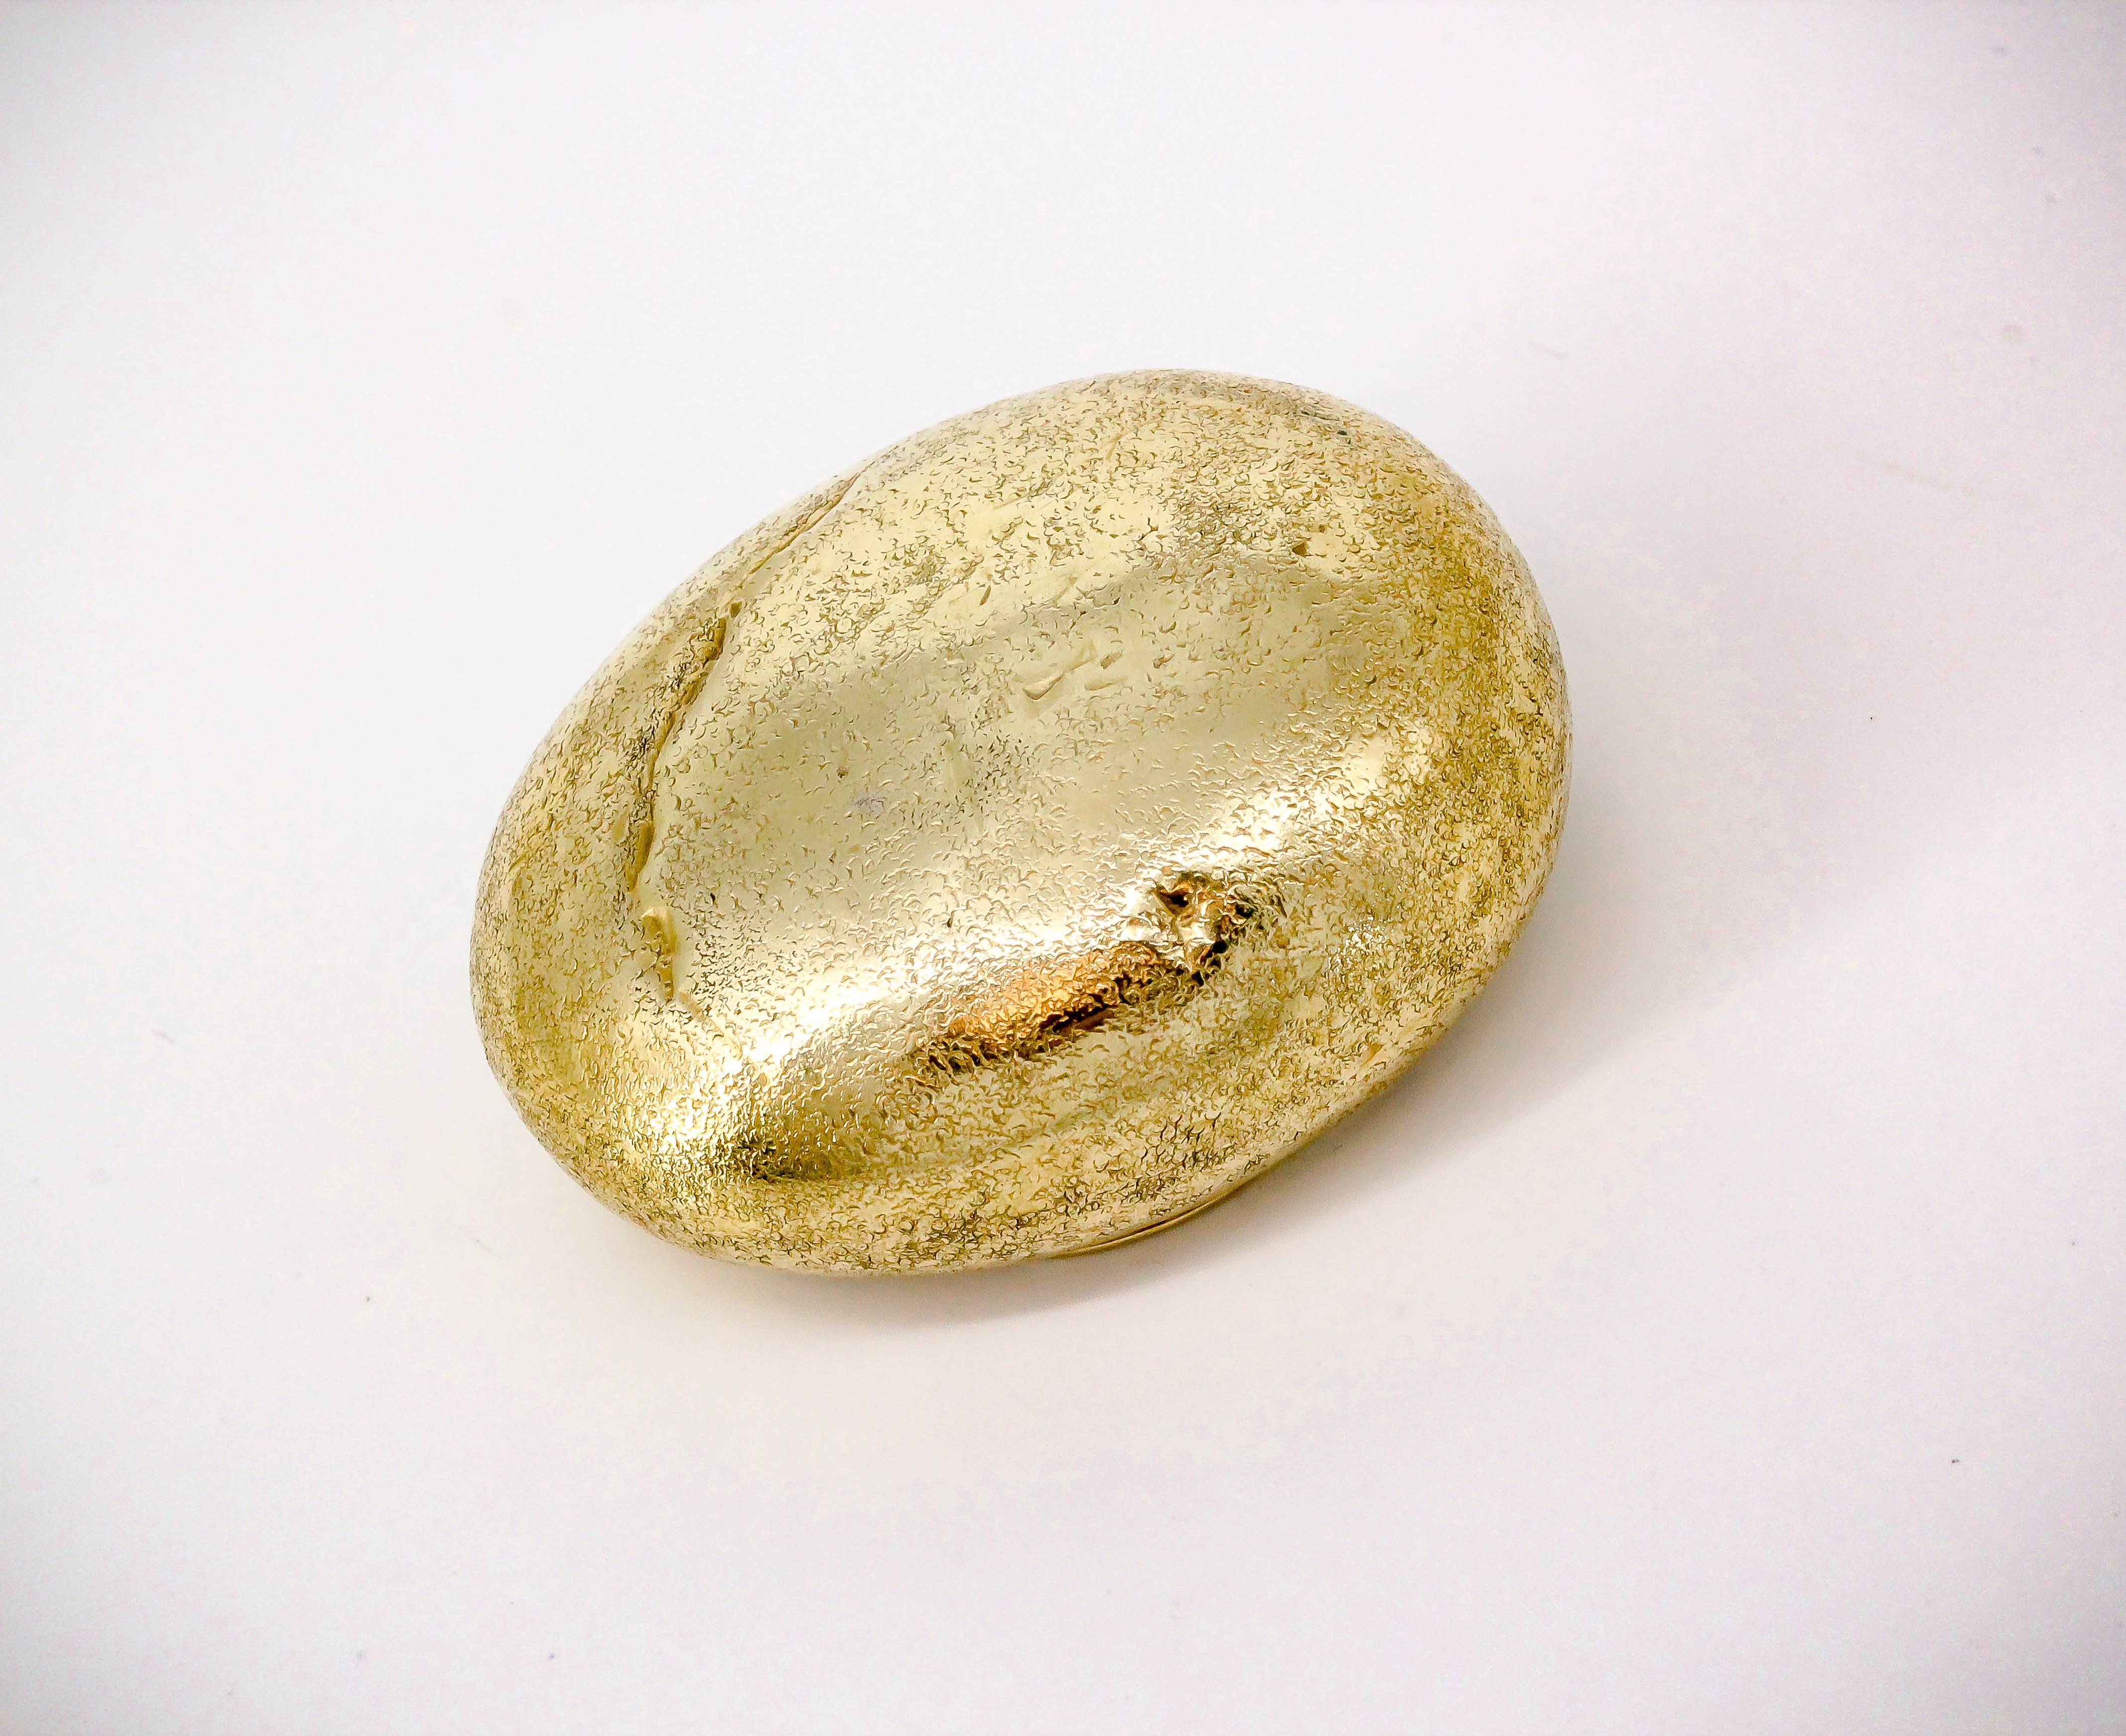 Whimsical 18K yellow gold pill box by Tiffany & Co. Schlumberger. It resembles an oval pebble, or rock. Beautifully made with an uneven textured look to resemble all the grooves and cuts in the rock. With a flat base. Superb